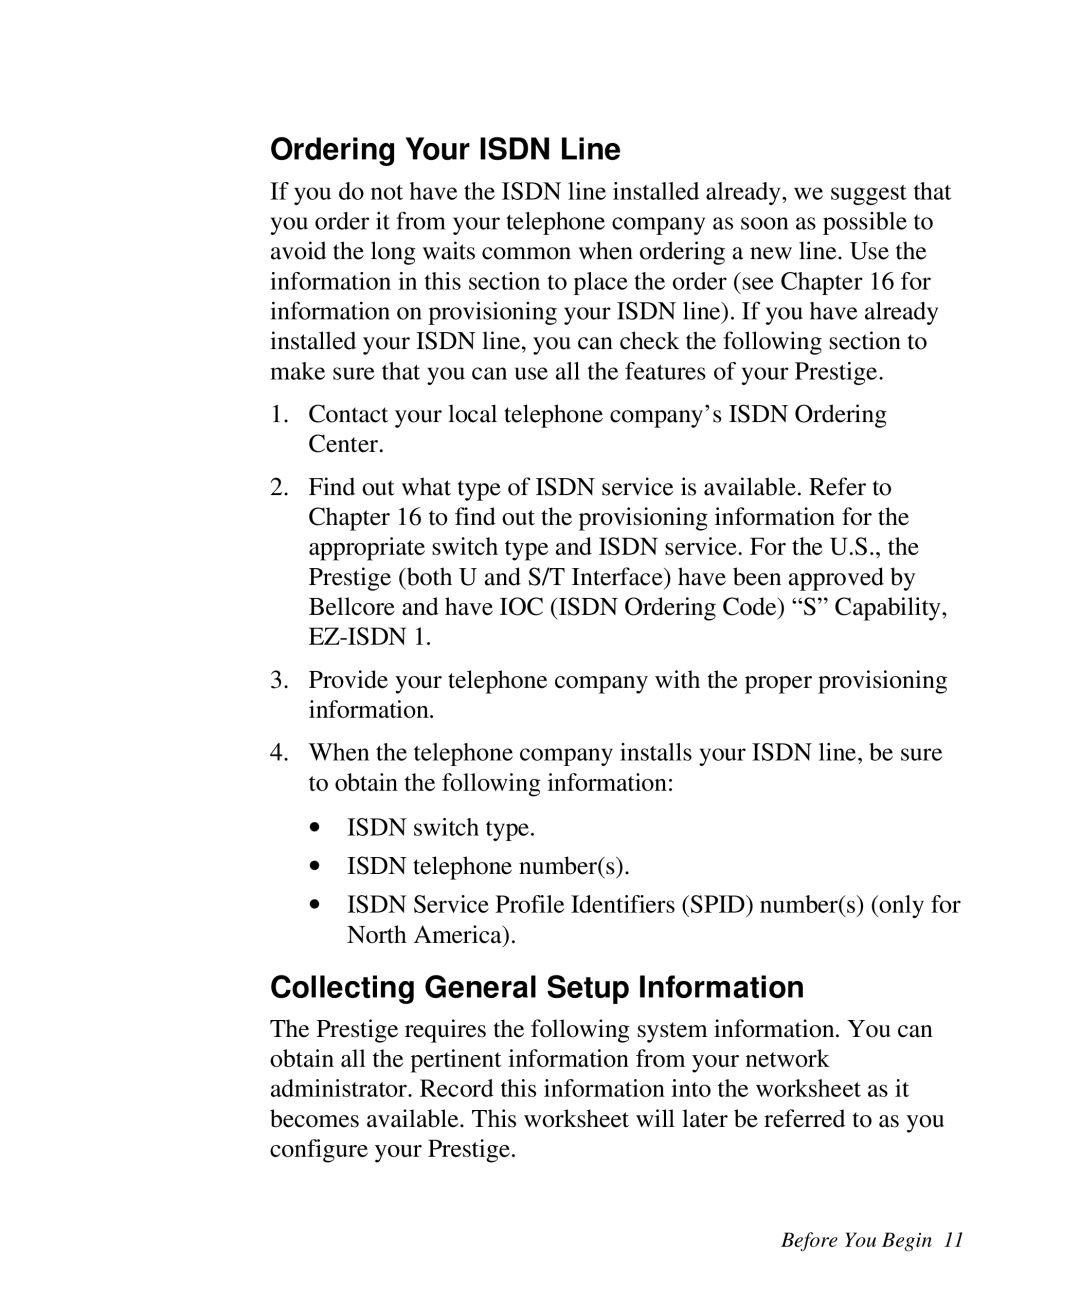 ZyXEL Communications Prestige 128 user manual Ordering Your ISDN Line, Collecting General Setup Information 